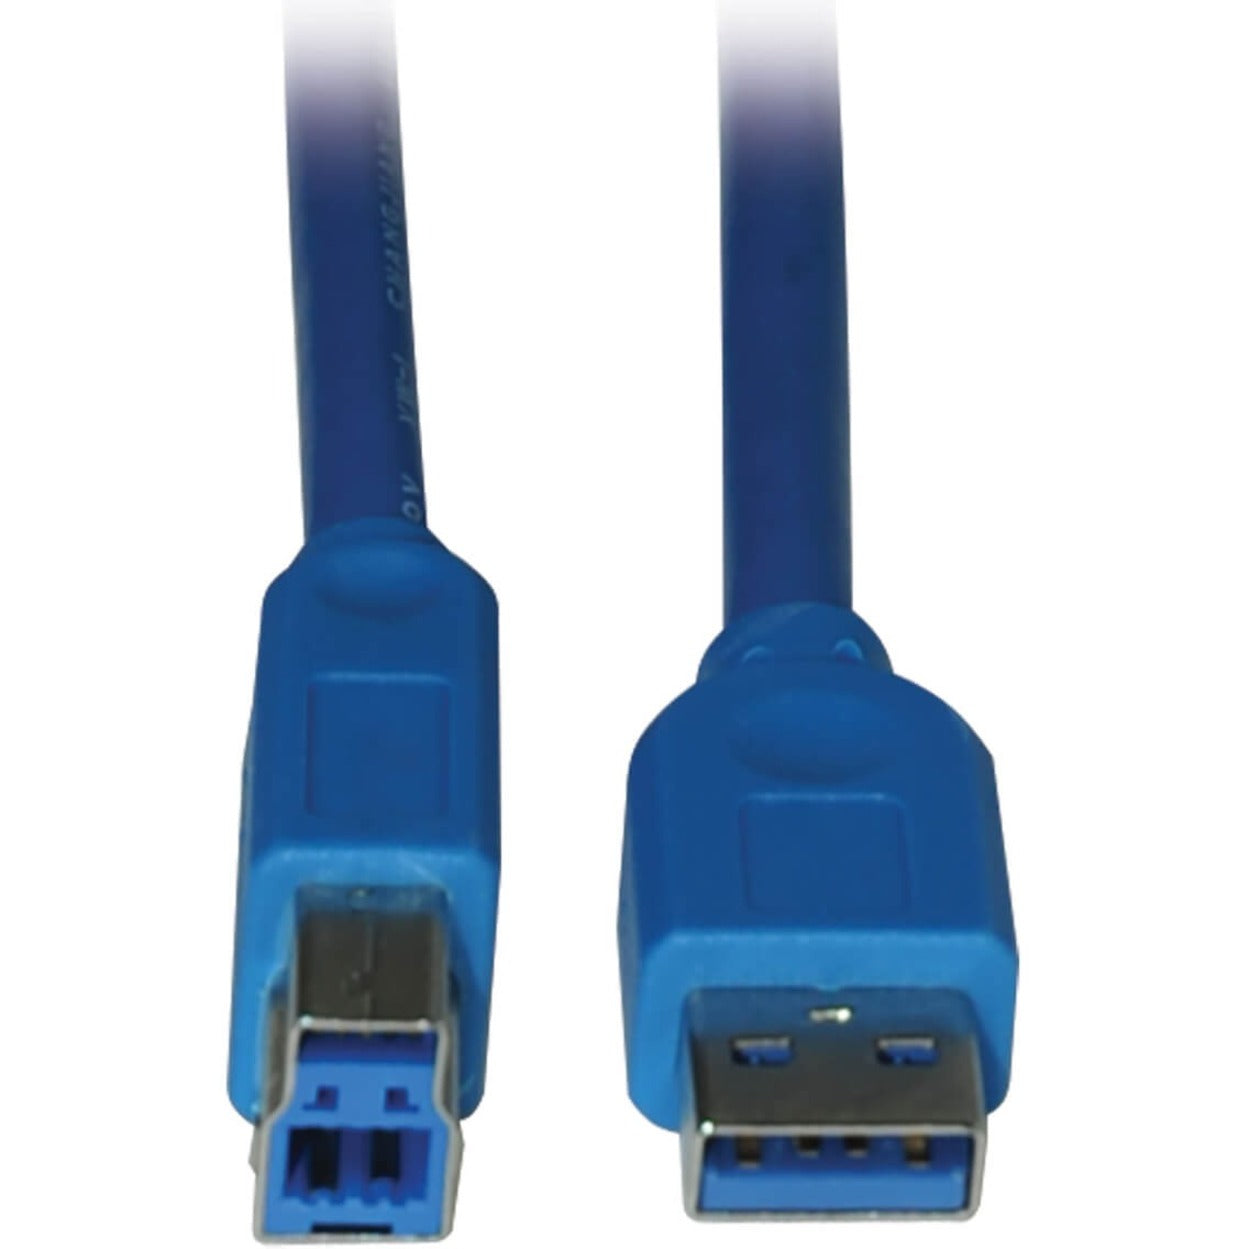 Tripp Lite U322-006 USB 3.0 Super Speed Device Cable AB 6FT, Blue - High-Speed Data Transfer for Your Devices